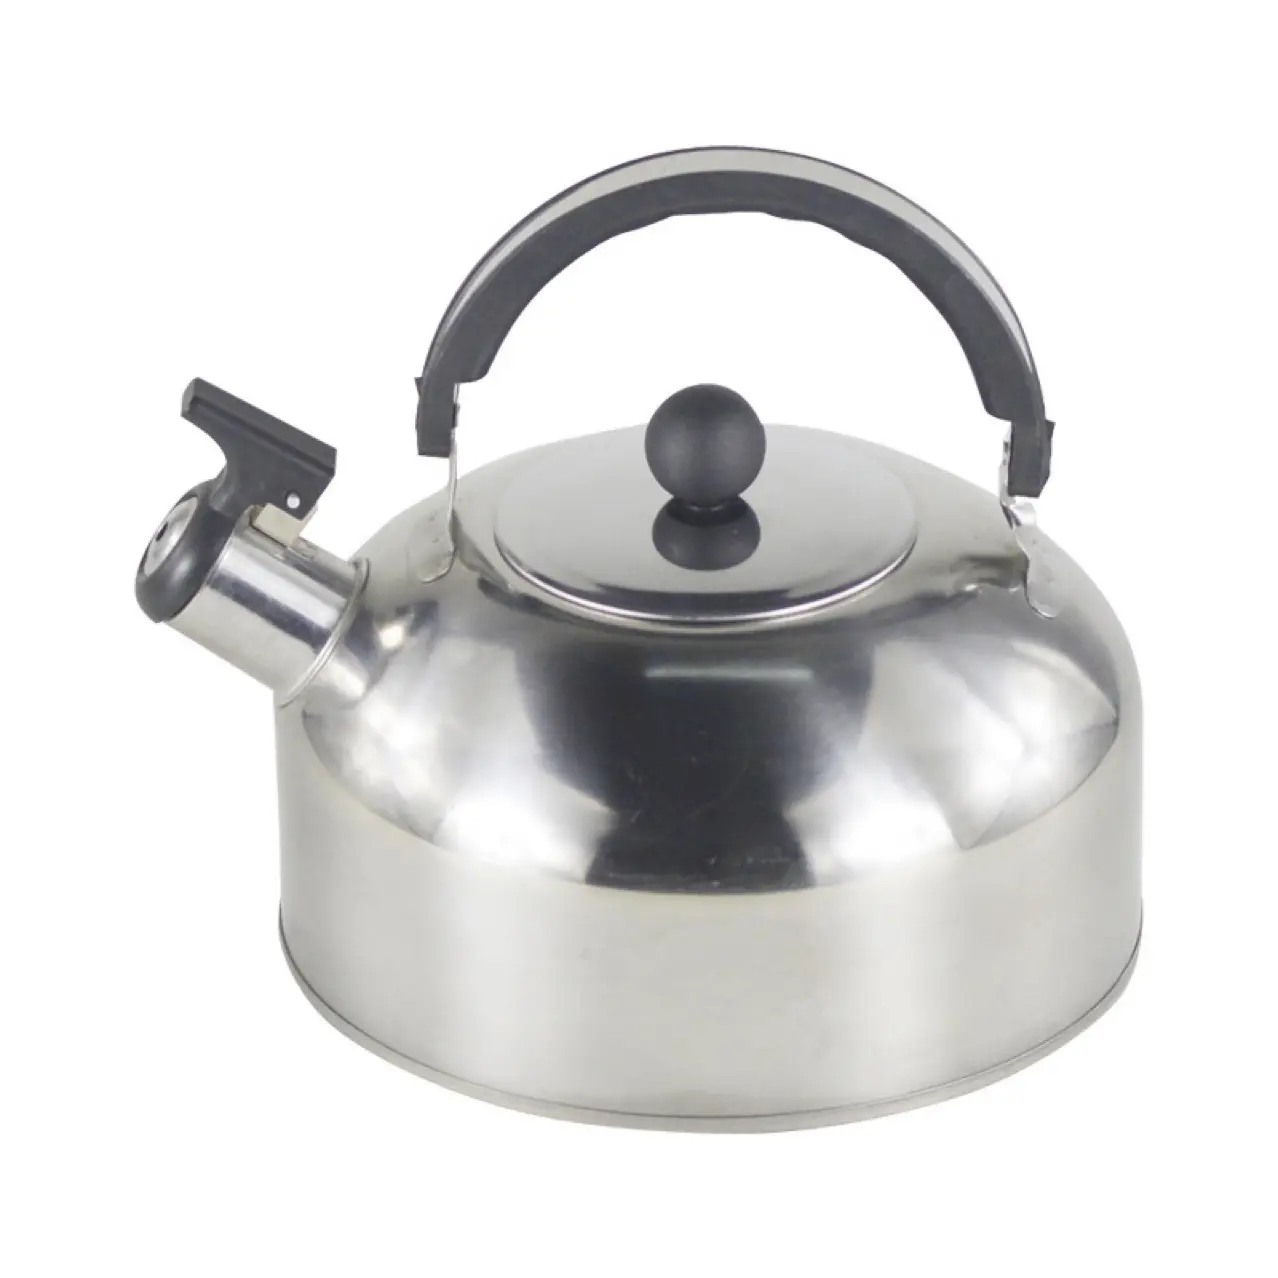 Stainless Steel Whistling Kettle Water Kettle for Stovetop Teapot with Heat Insulated Handle & Pour Spout Whistling Kettle